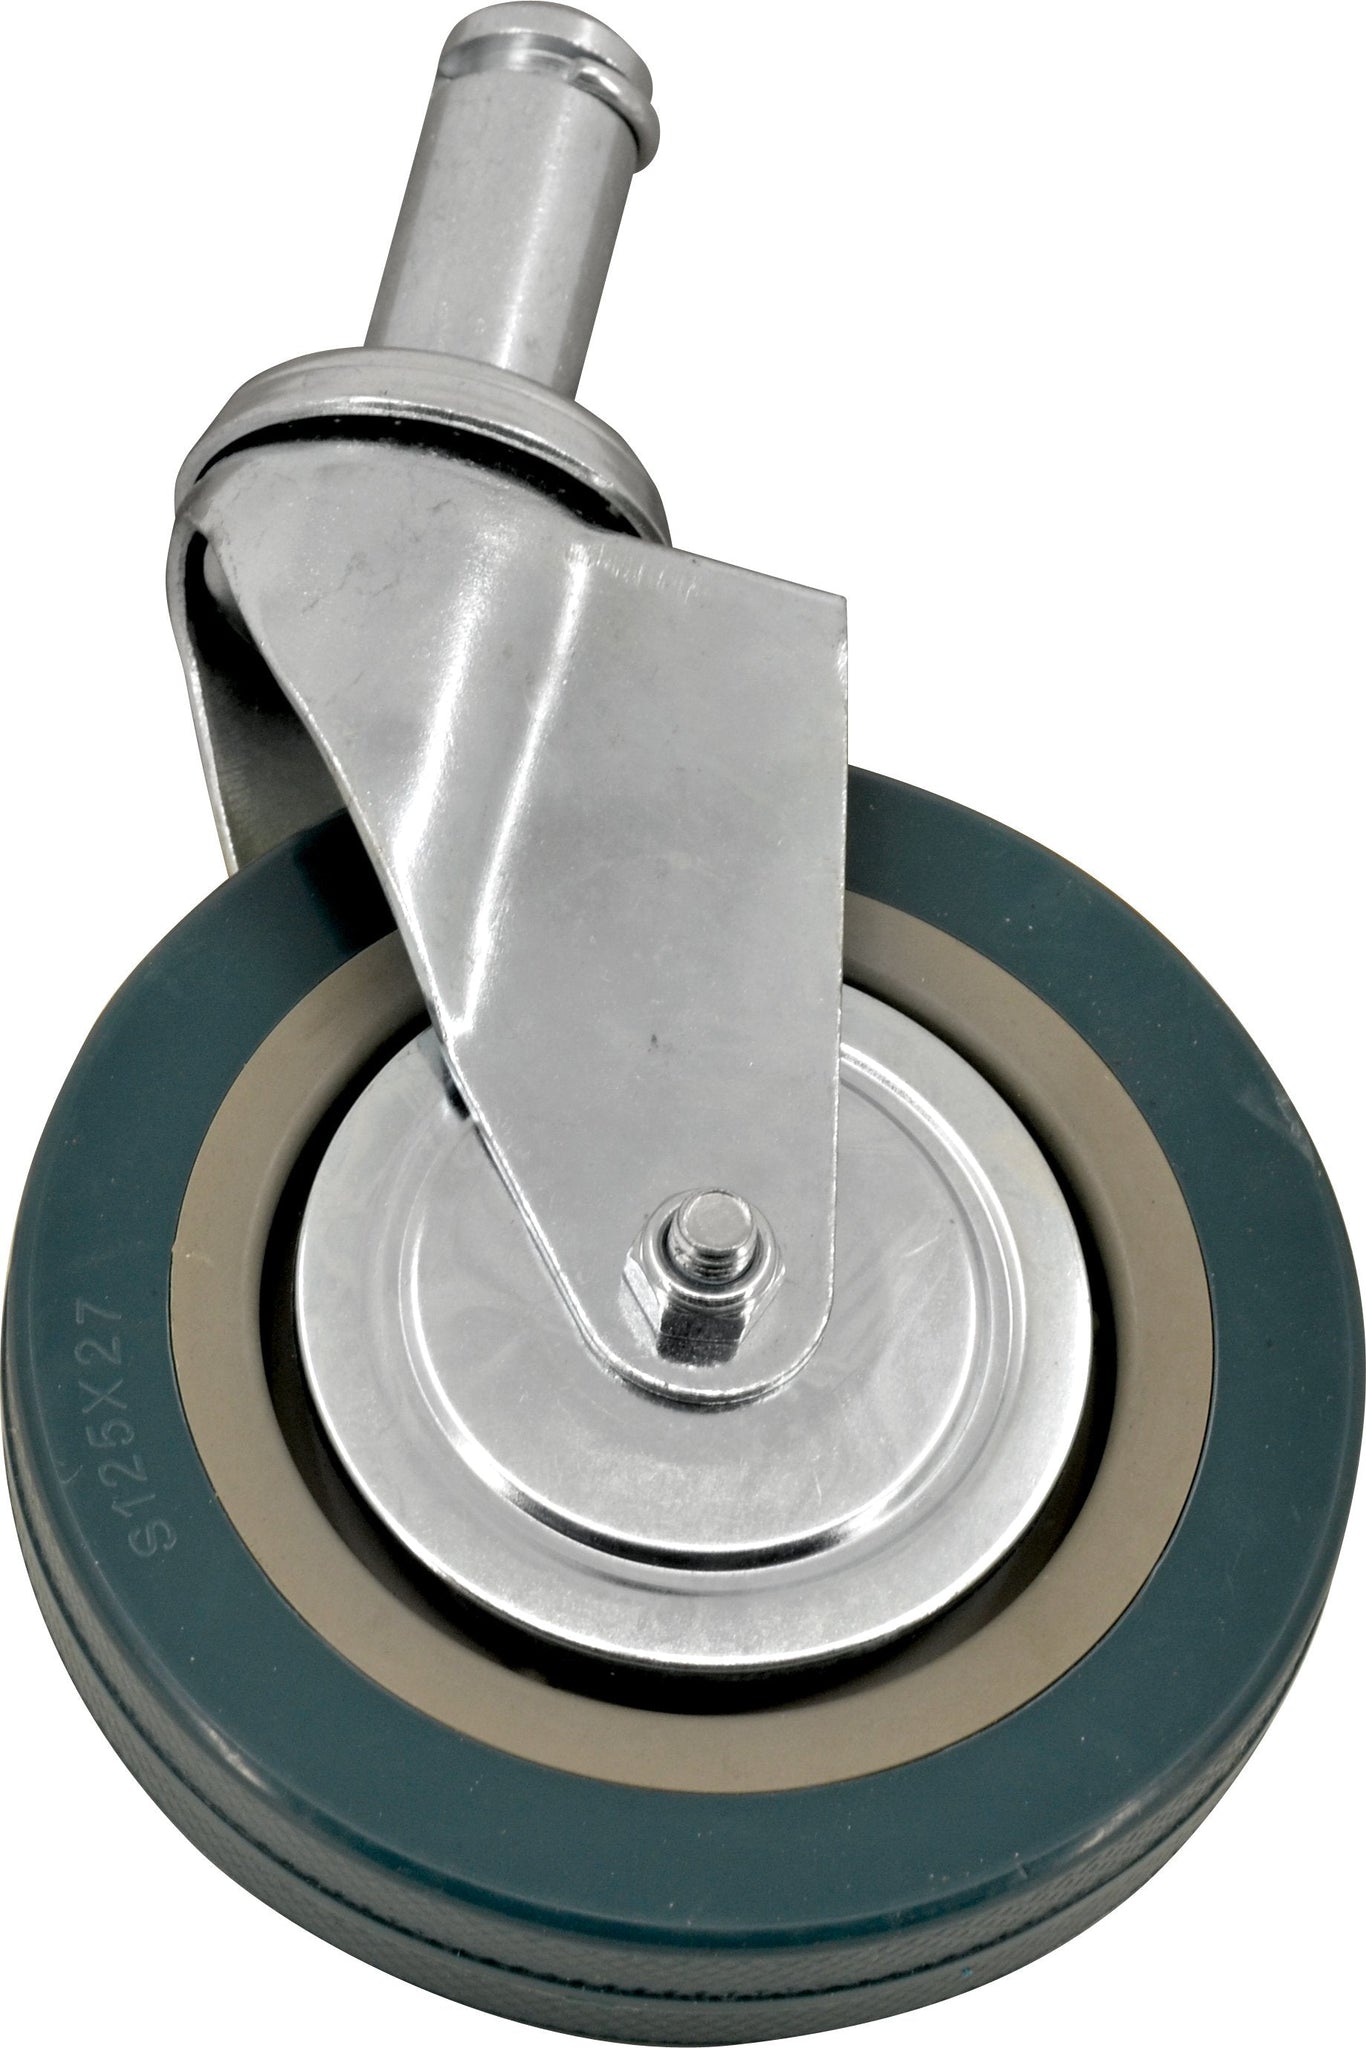 Omcan - 5” Industrial Caster For Shelving Units, 10/cs - 14460